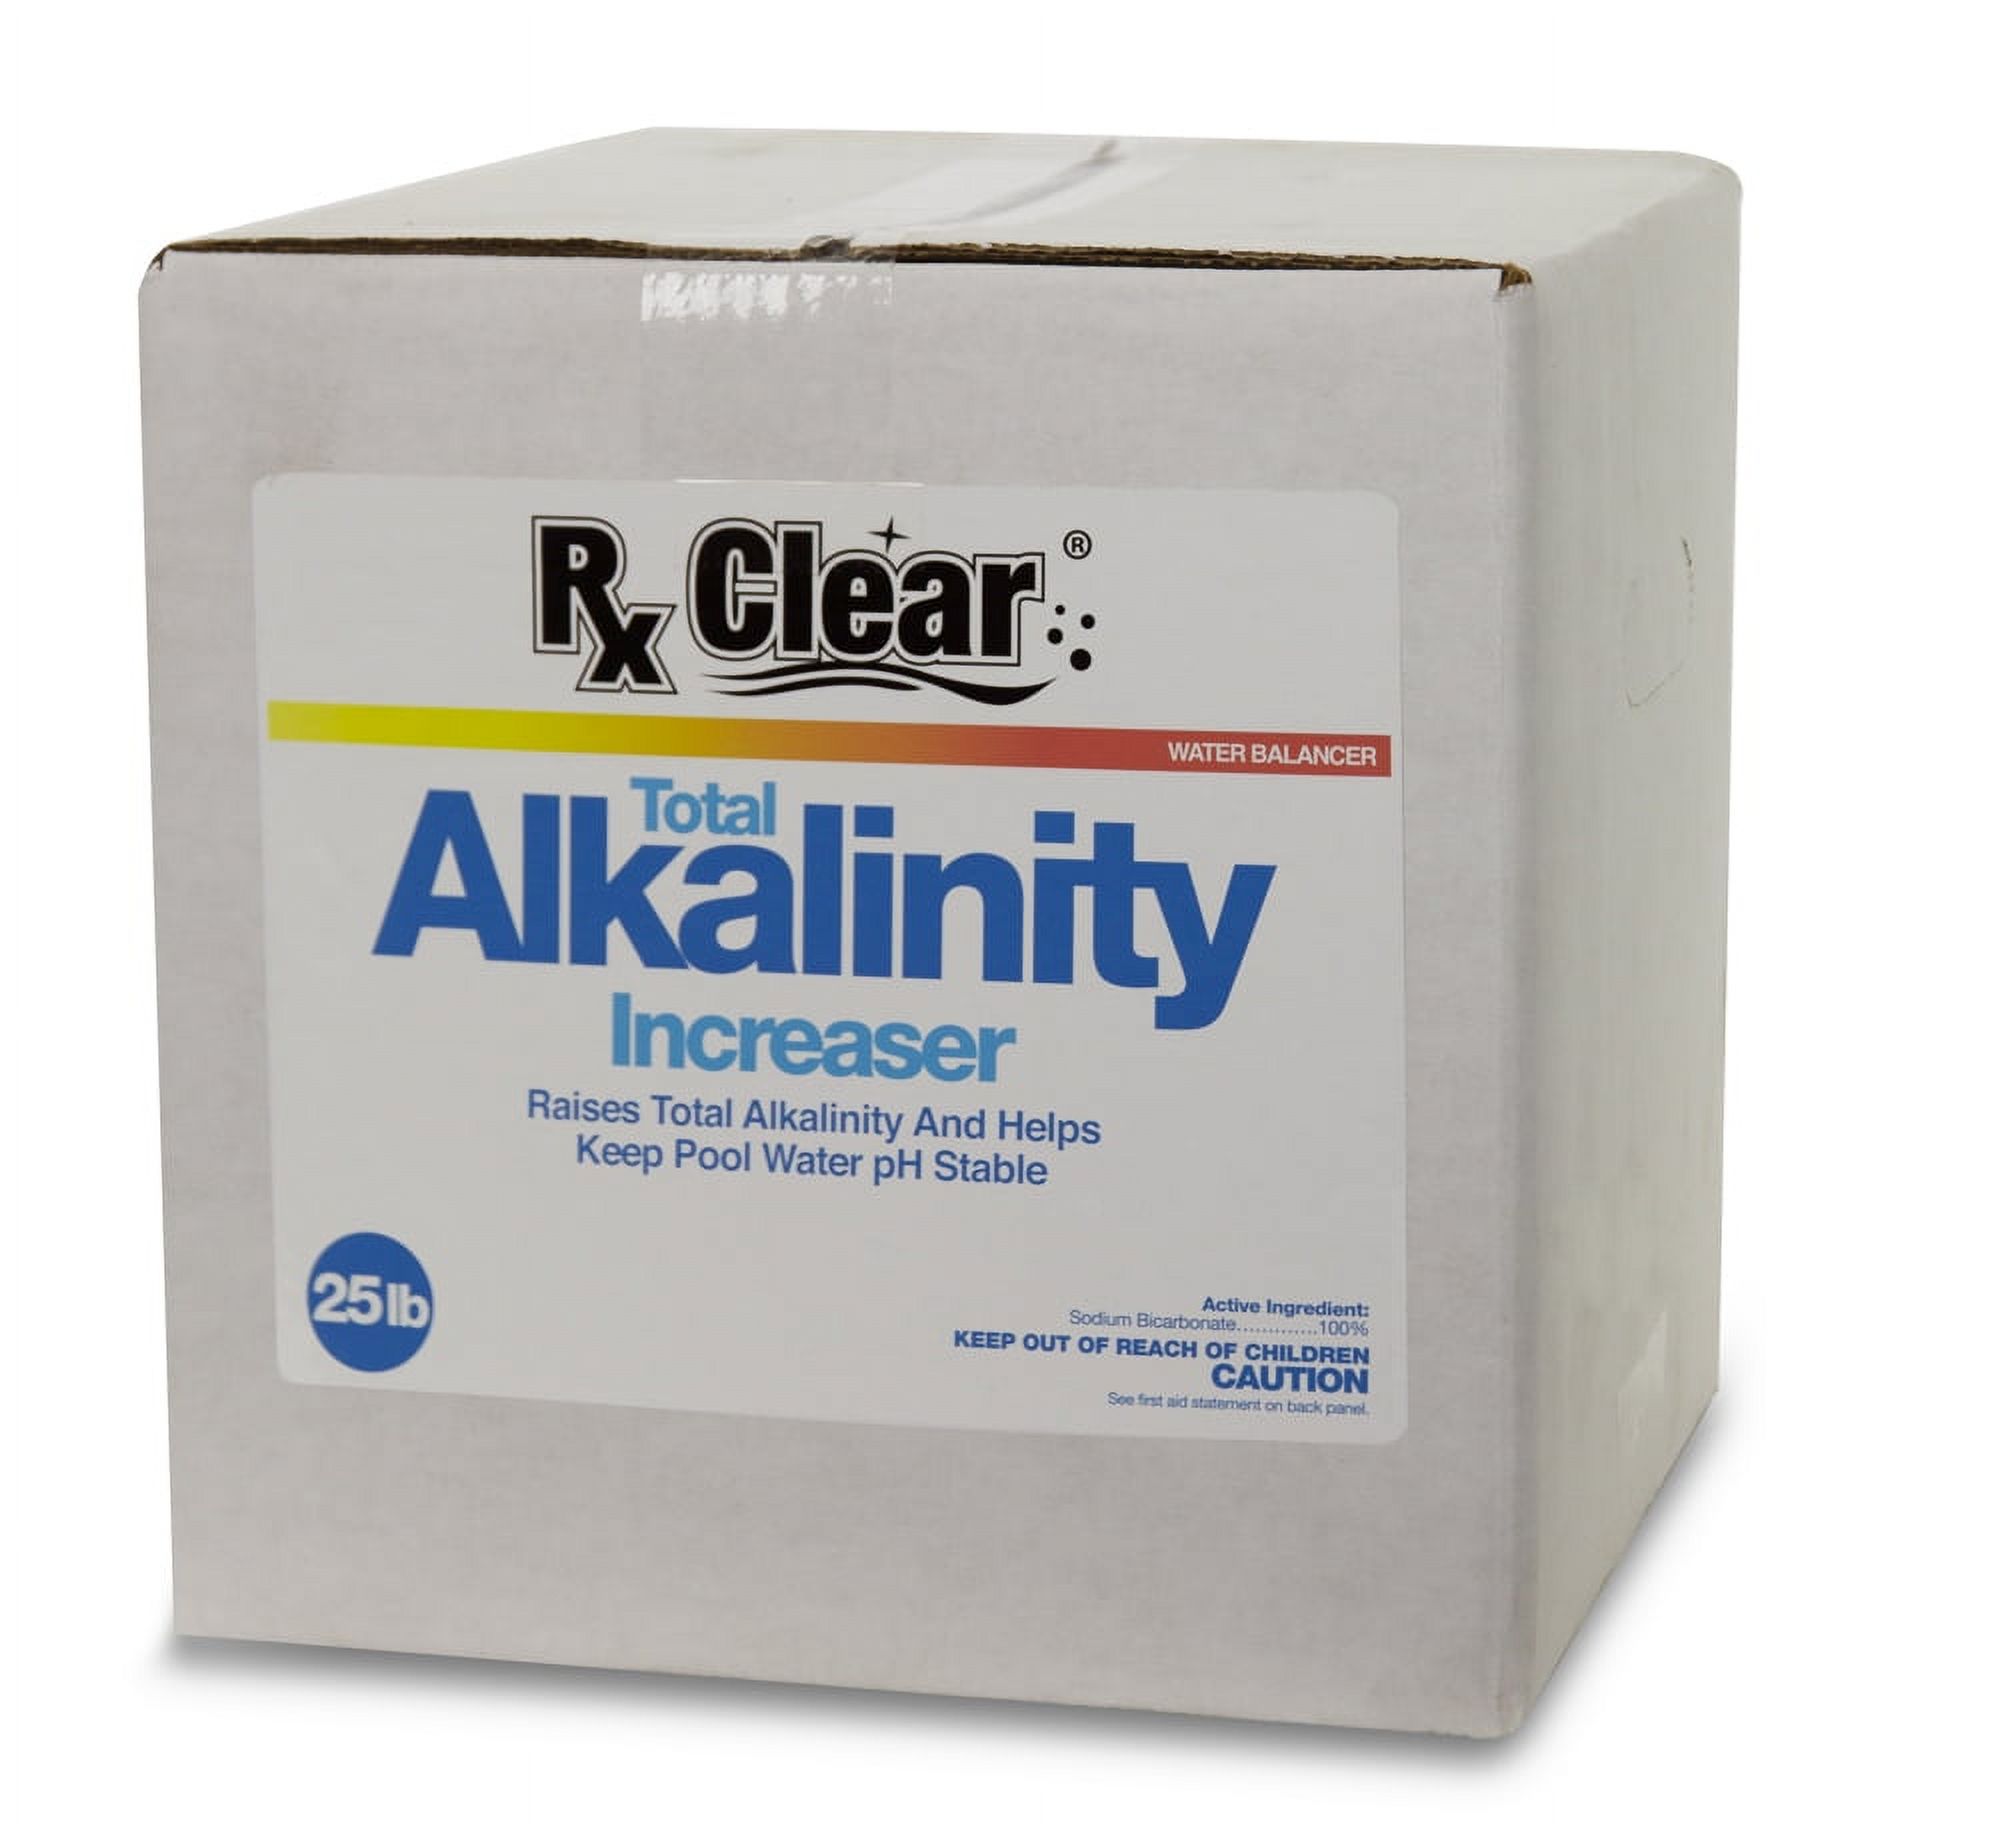 Rx Clear Total Alkalinity Increaser for Swimming Pools, Sodium Bicarbonate, 25 lbs - image 1 of 7